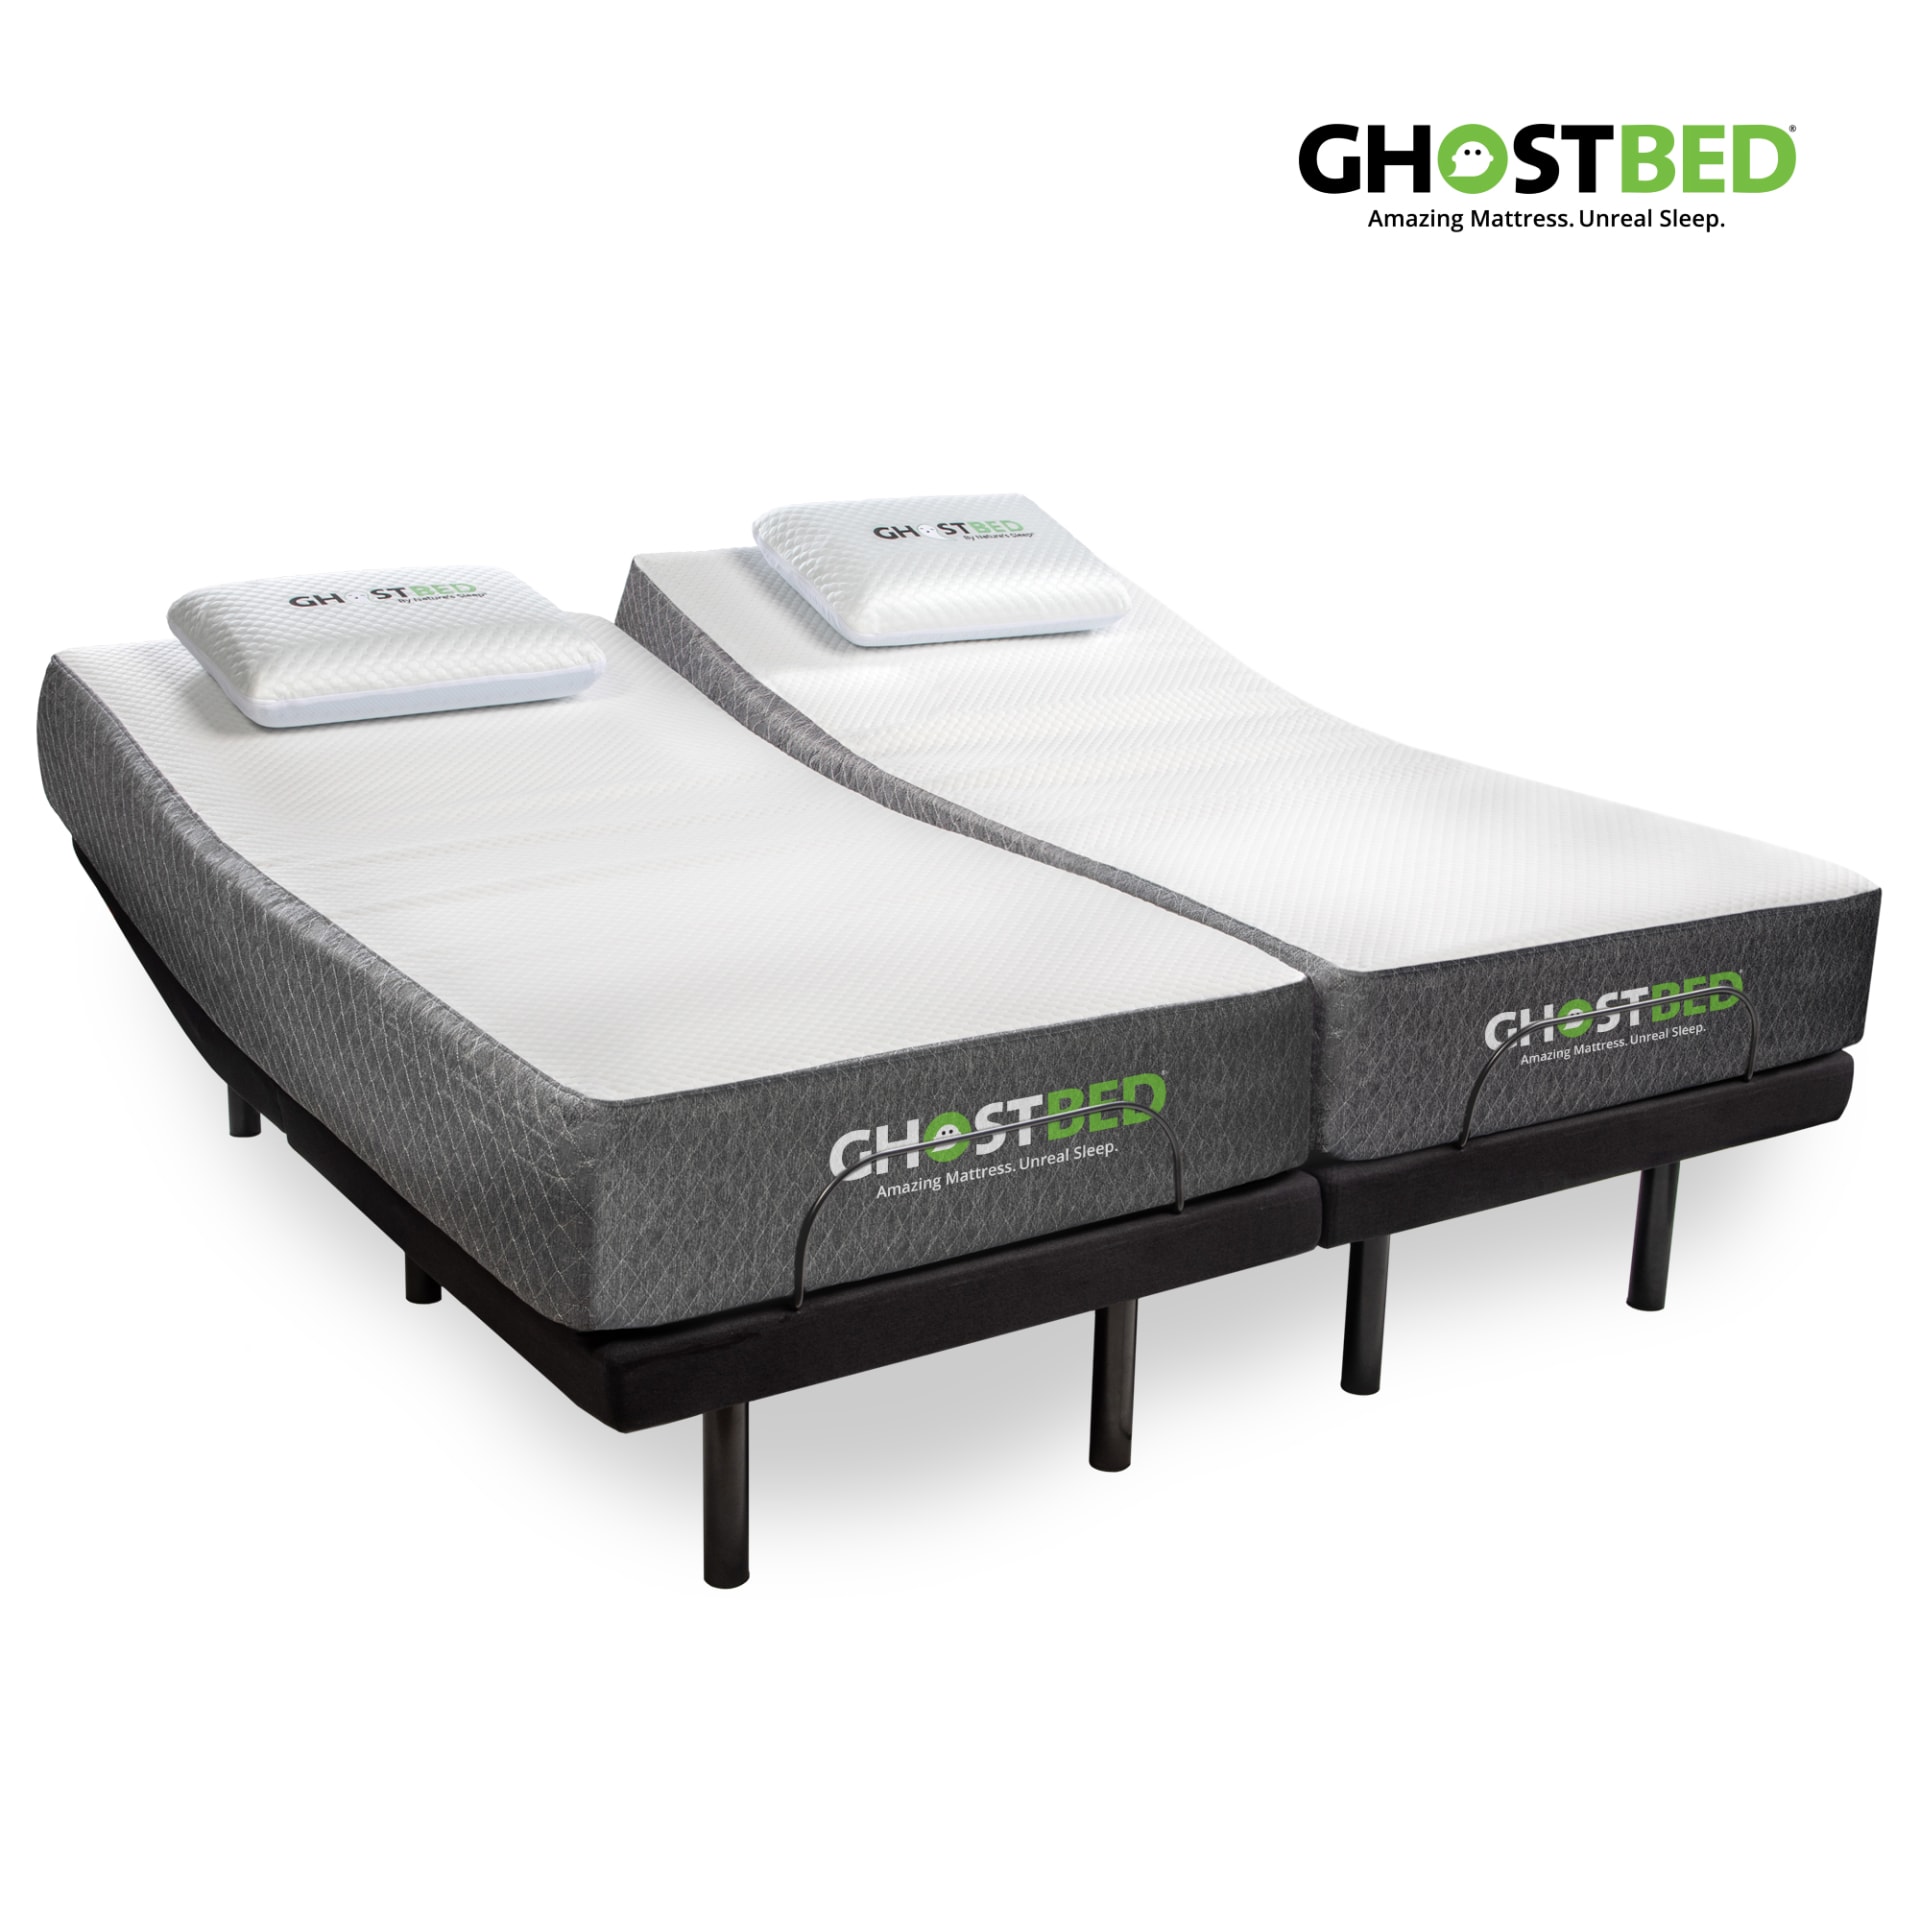 Ghostbed 11 Memory Foam Mattress With, Thomasville Split King Adjustable Bed